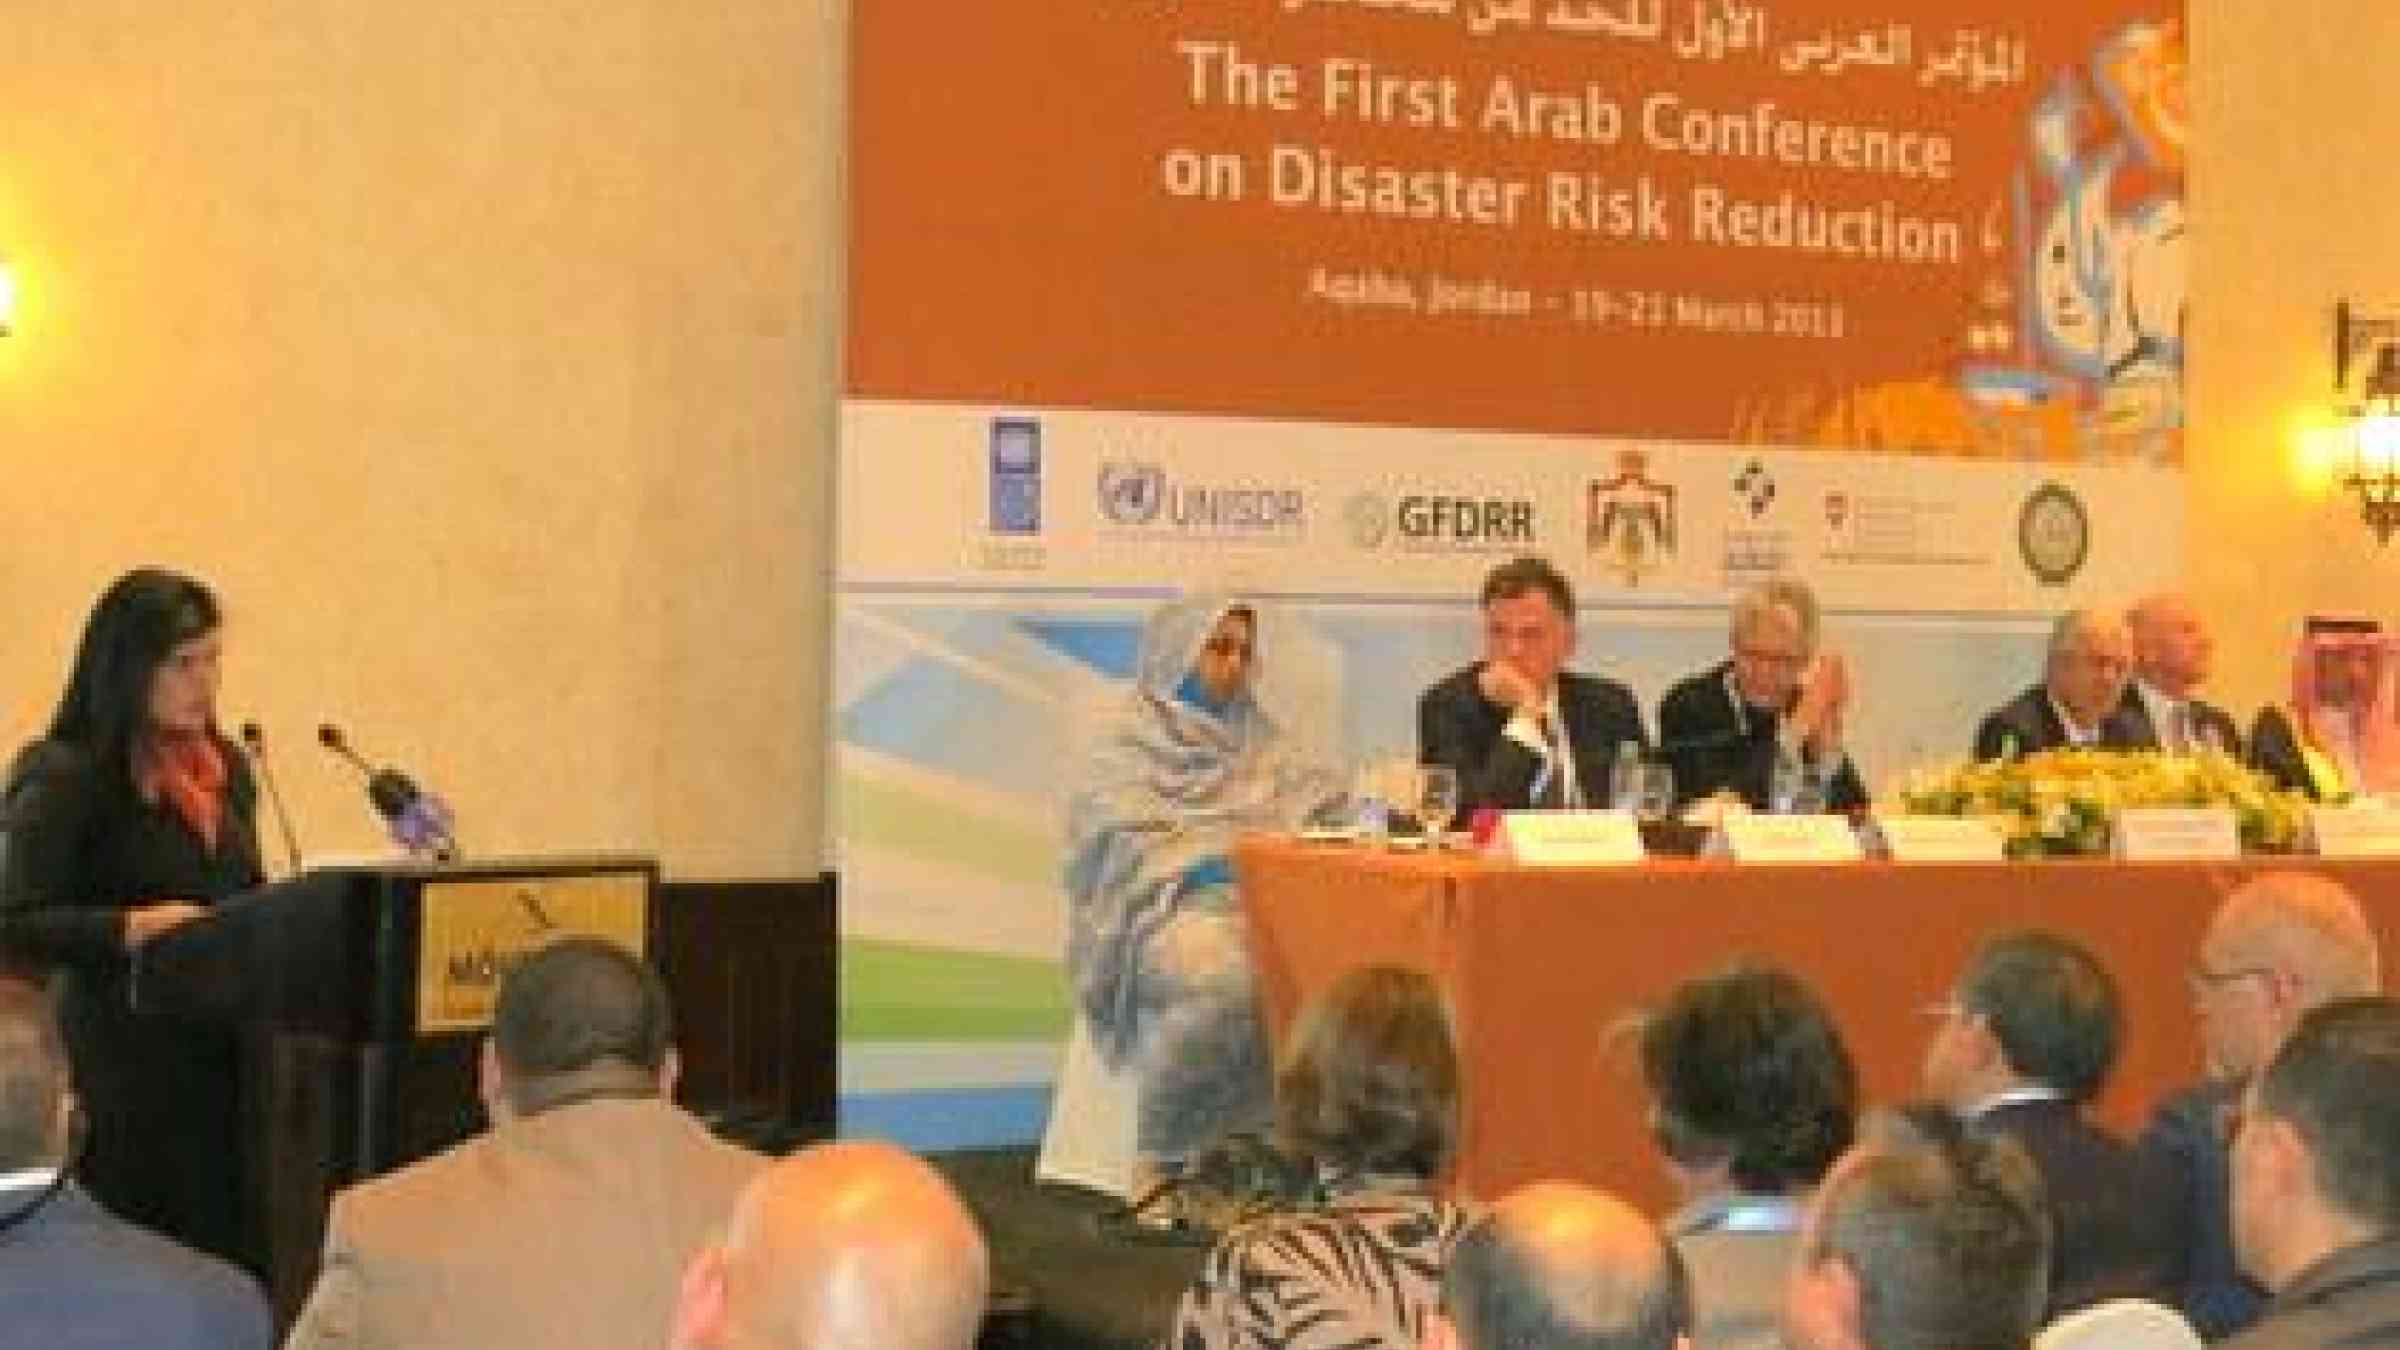 HRH Princess Sumaya bint El Hassan, President of the Royal Scientific Society of the Hashemite Kingdom of Jordan, addressing the opening ceremony of the 1st Arab Conference on Disaster Risk Reduction today in Aqaba, Jordan.